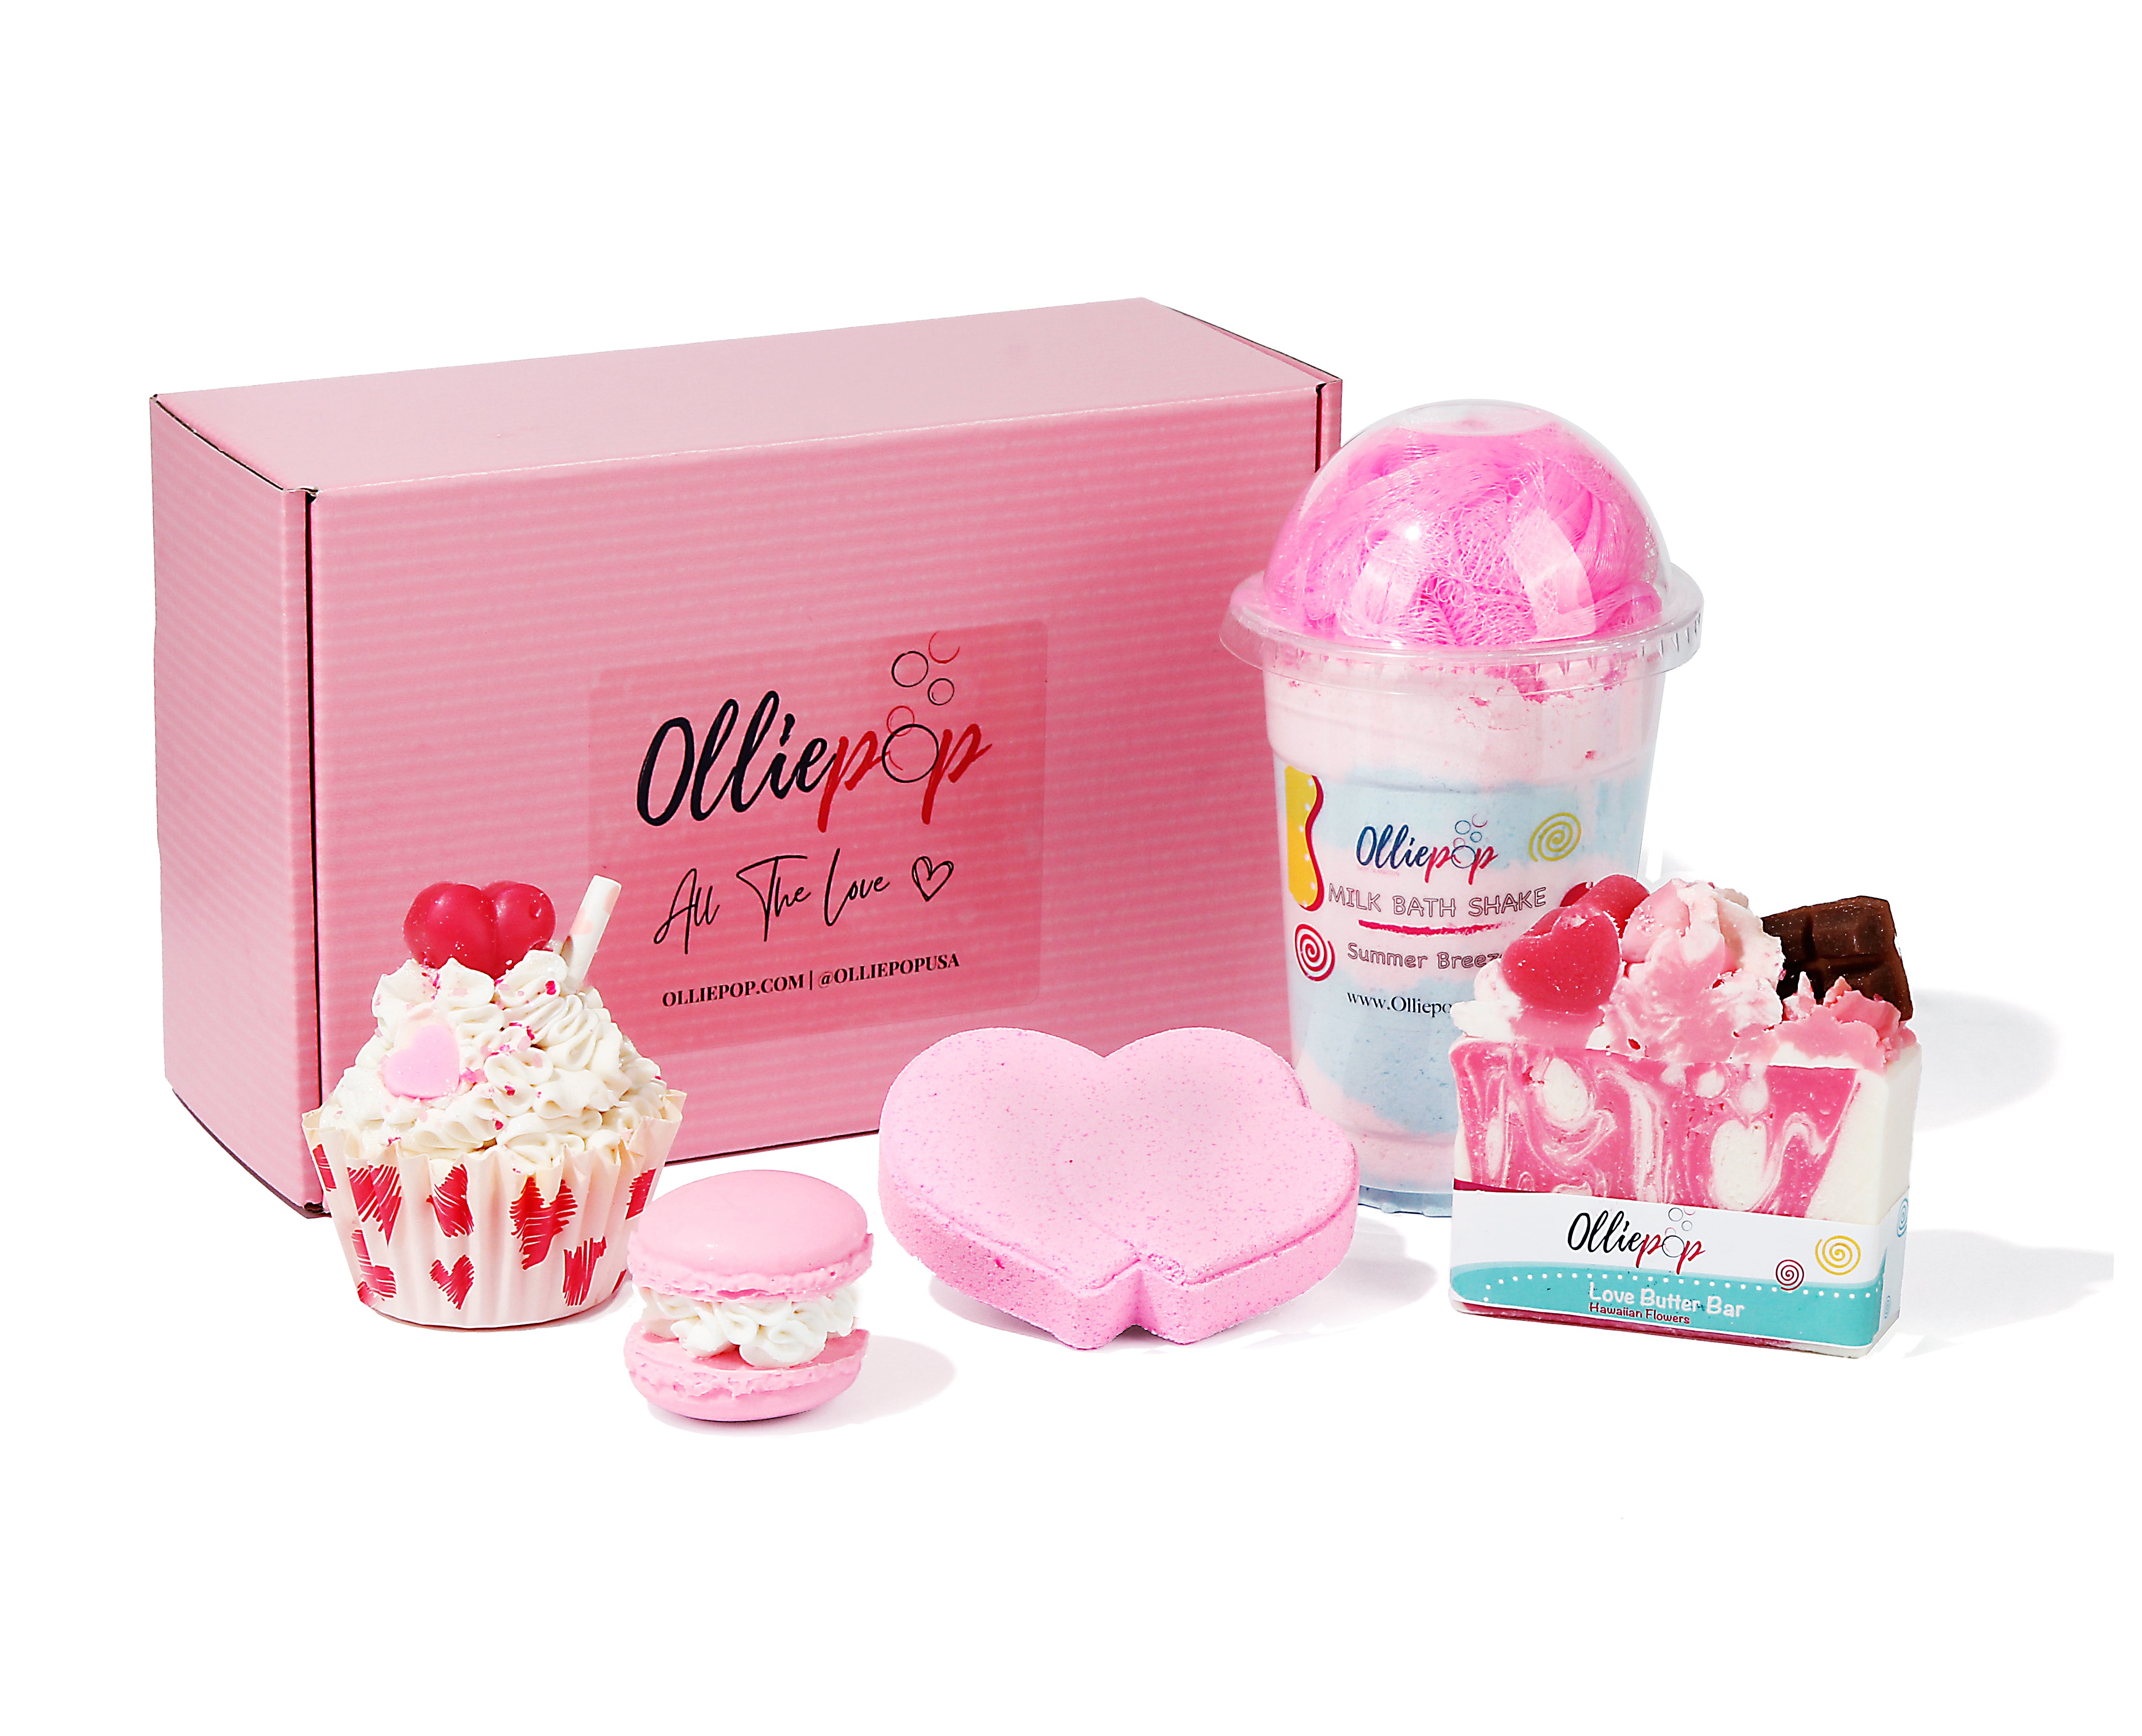 All The Love Gift Set